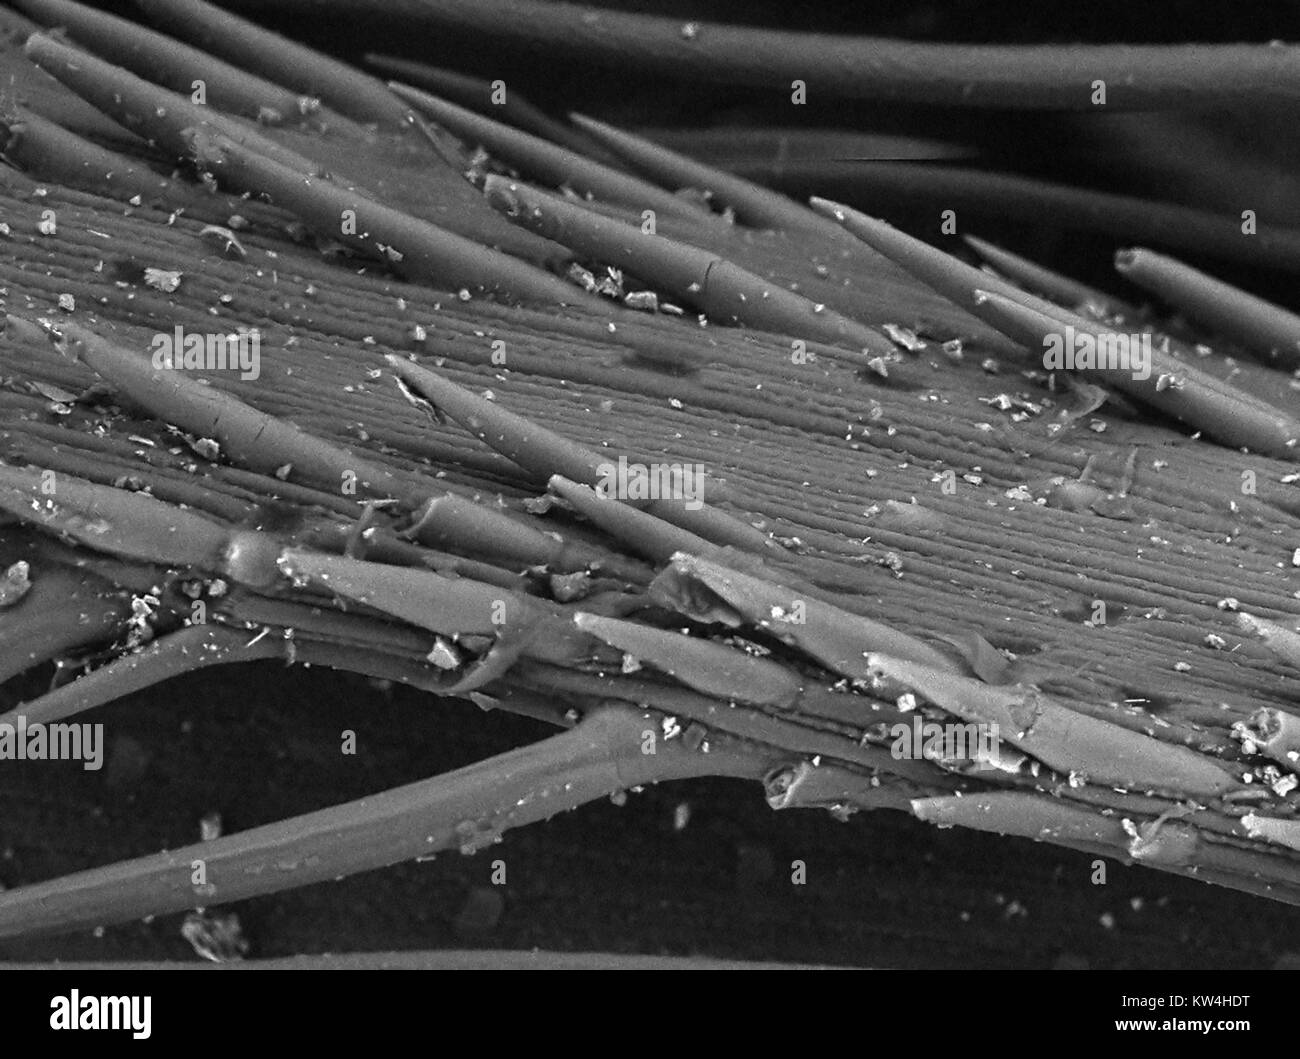 Scanning electron microscope (SEM) micrograph of the surface of a piece of foxtail grass (Hordeum murinum), showing microbarbs and particles of dust, at a magnification of 600x, 2016. Stock Photo